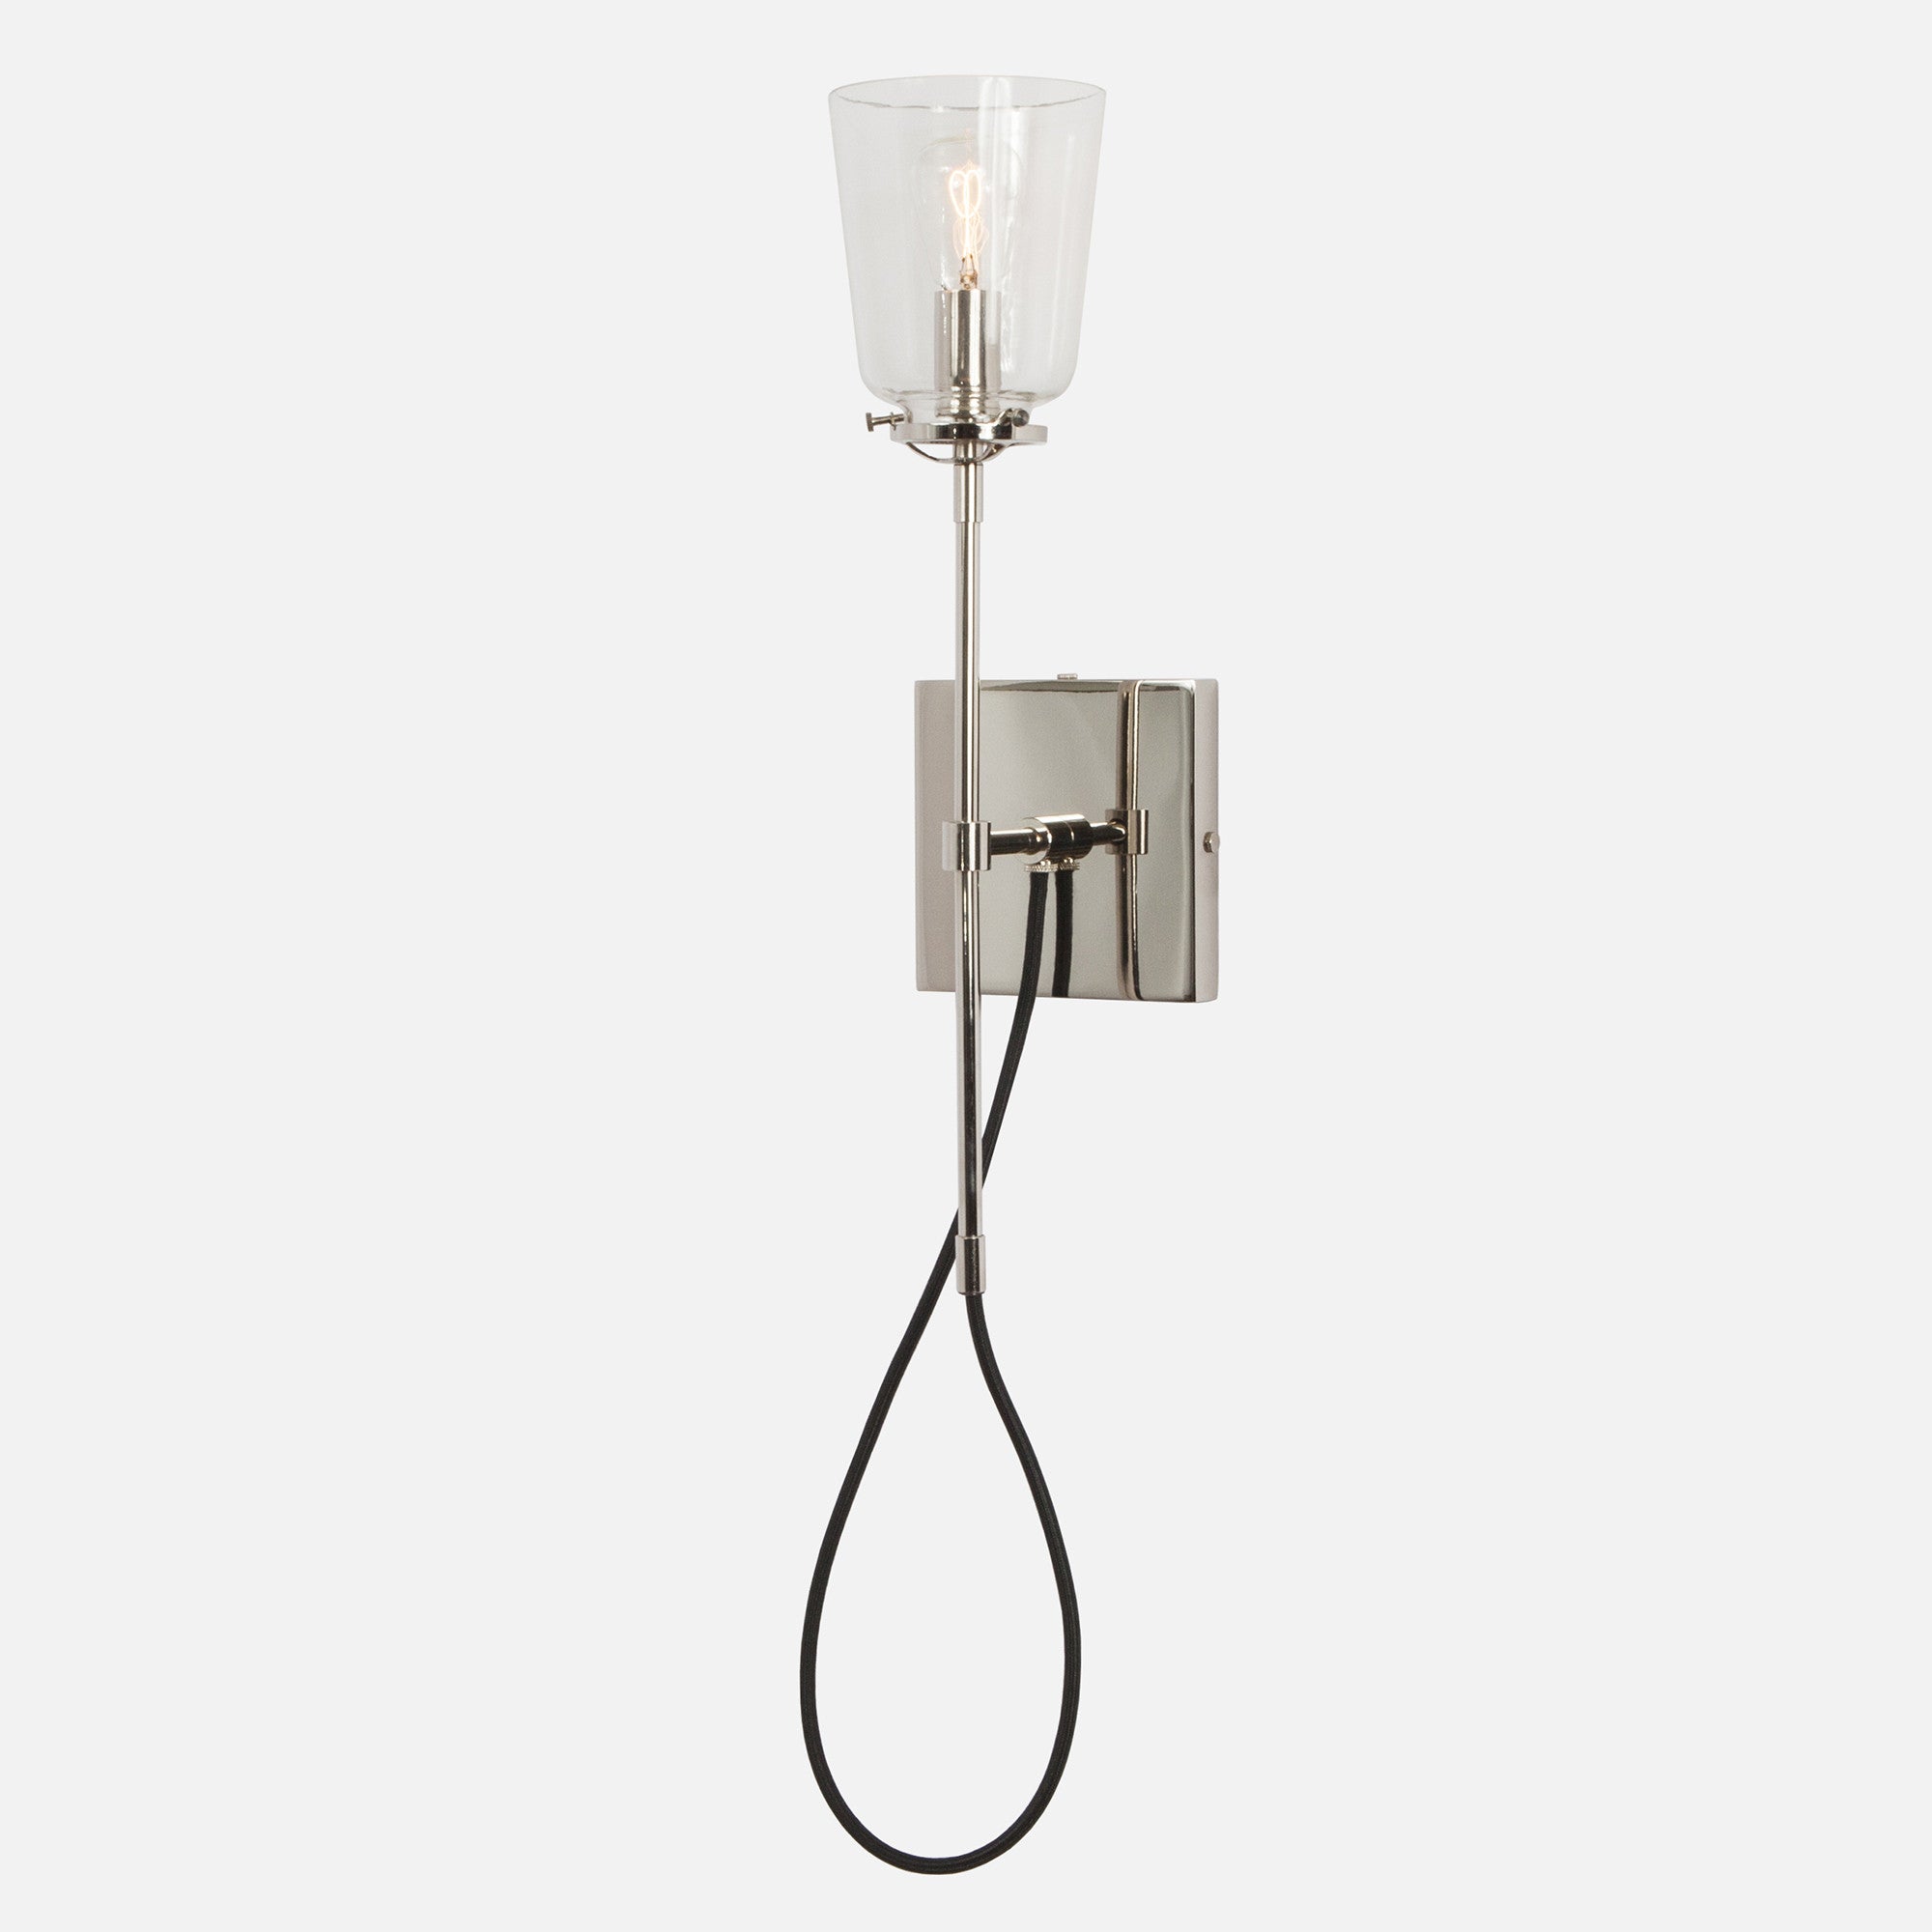 Modern Stemmed Wall Sconce - Bell Shade - Polished Nickel